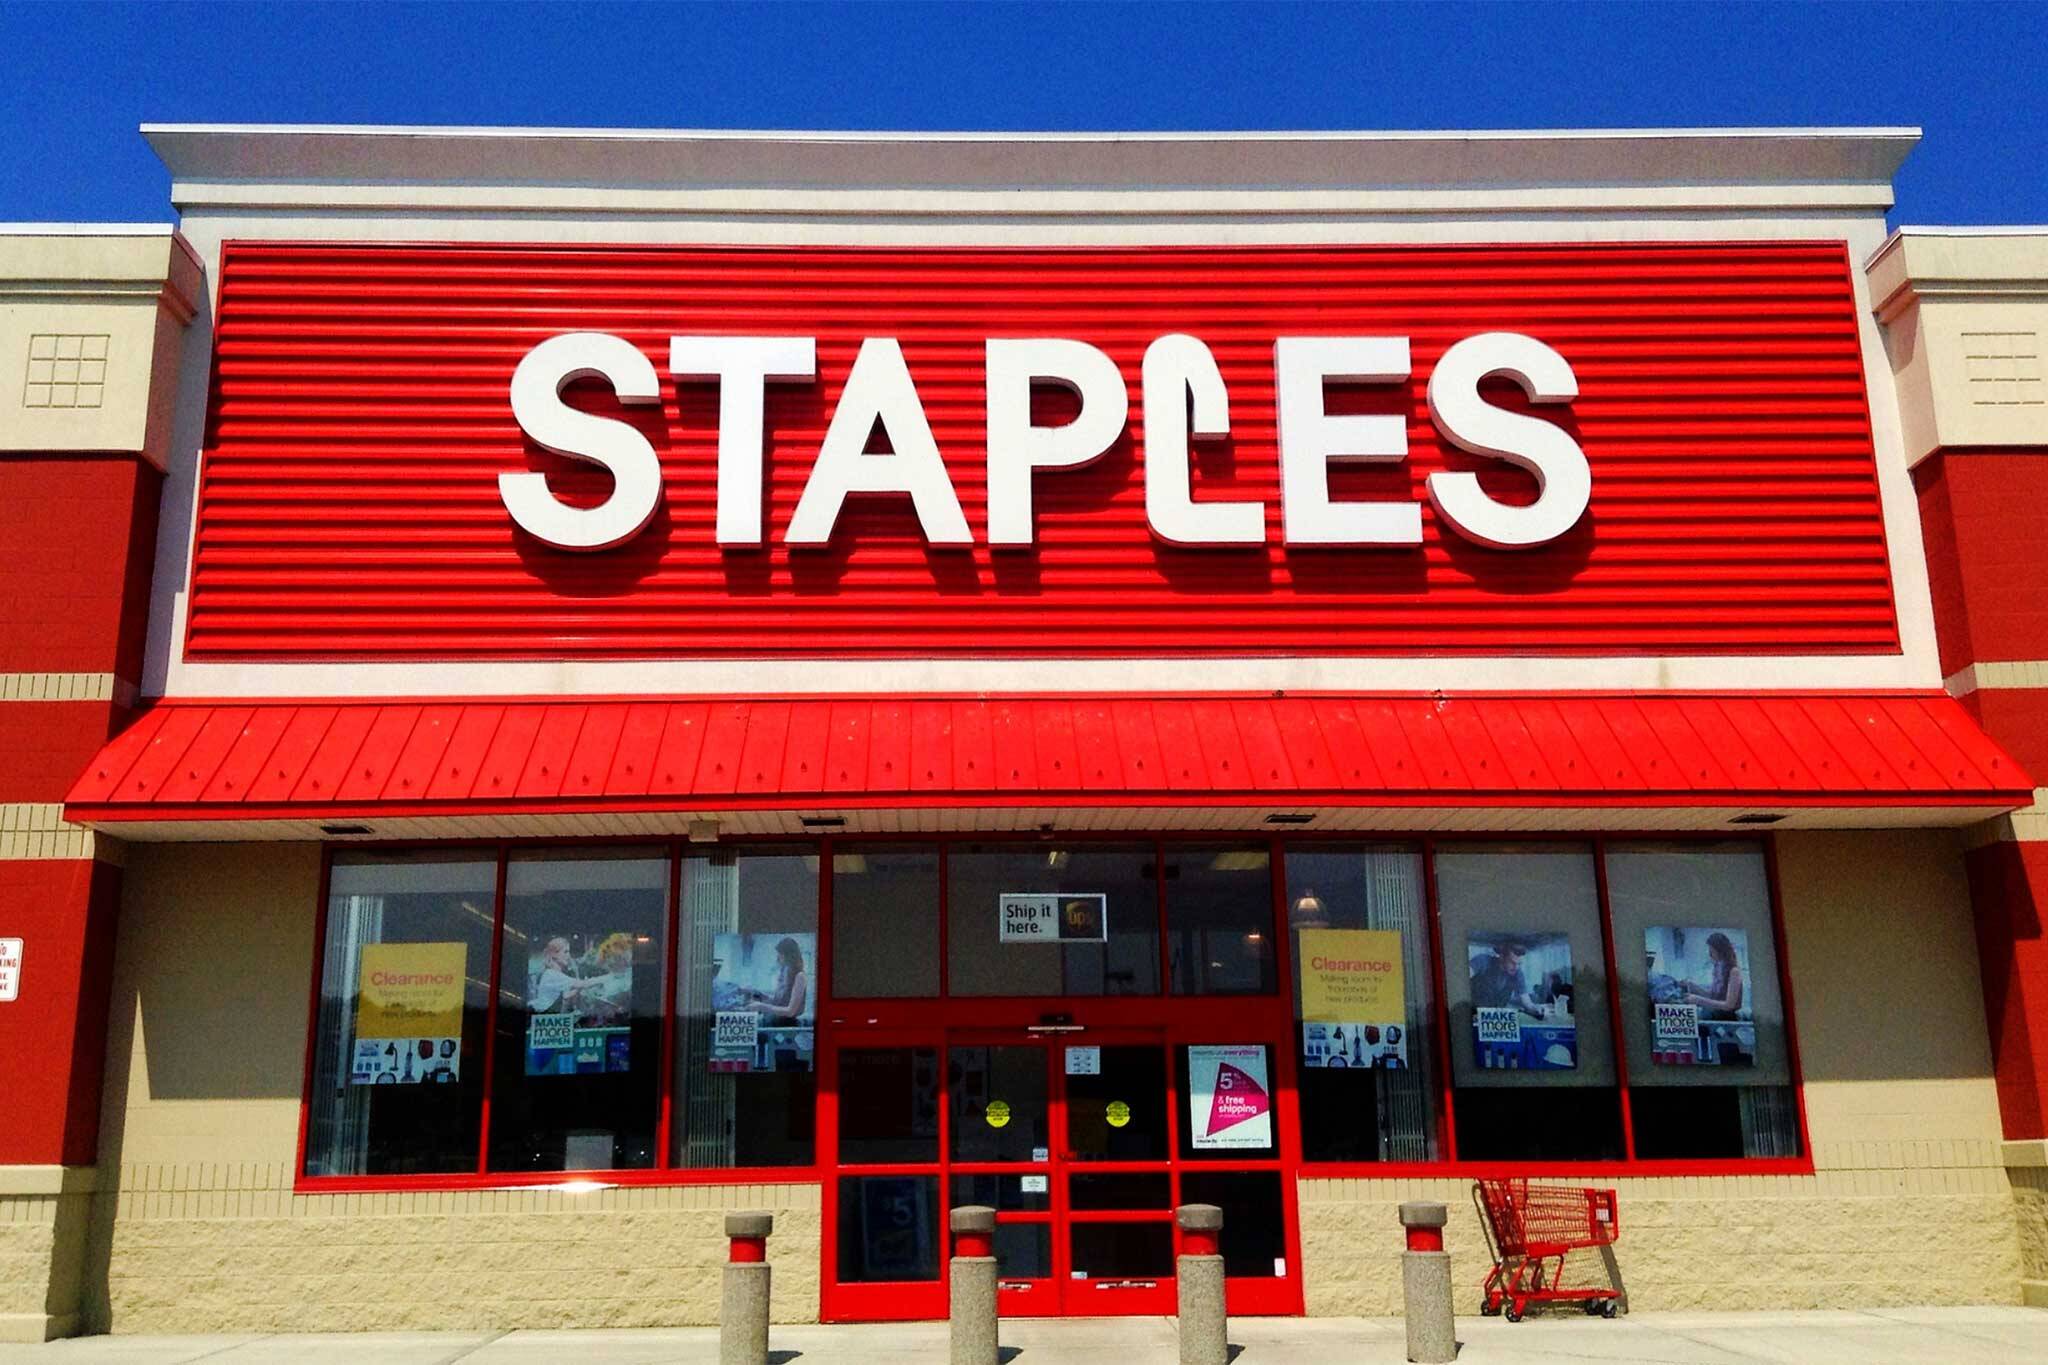 Staples Canada Launches Innovative Retail Concept Featuring Co-Working  Spaces [Photos]